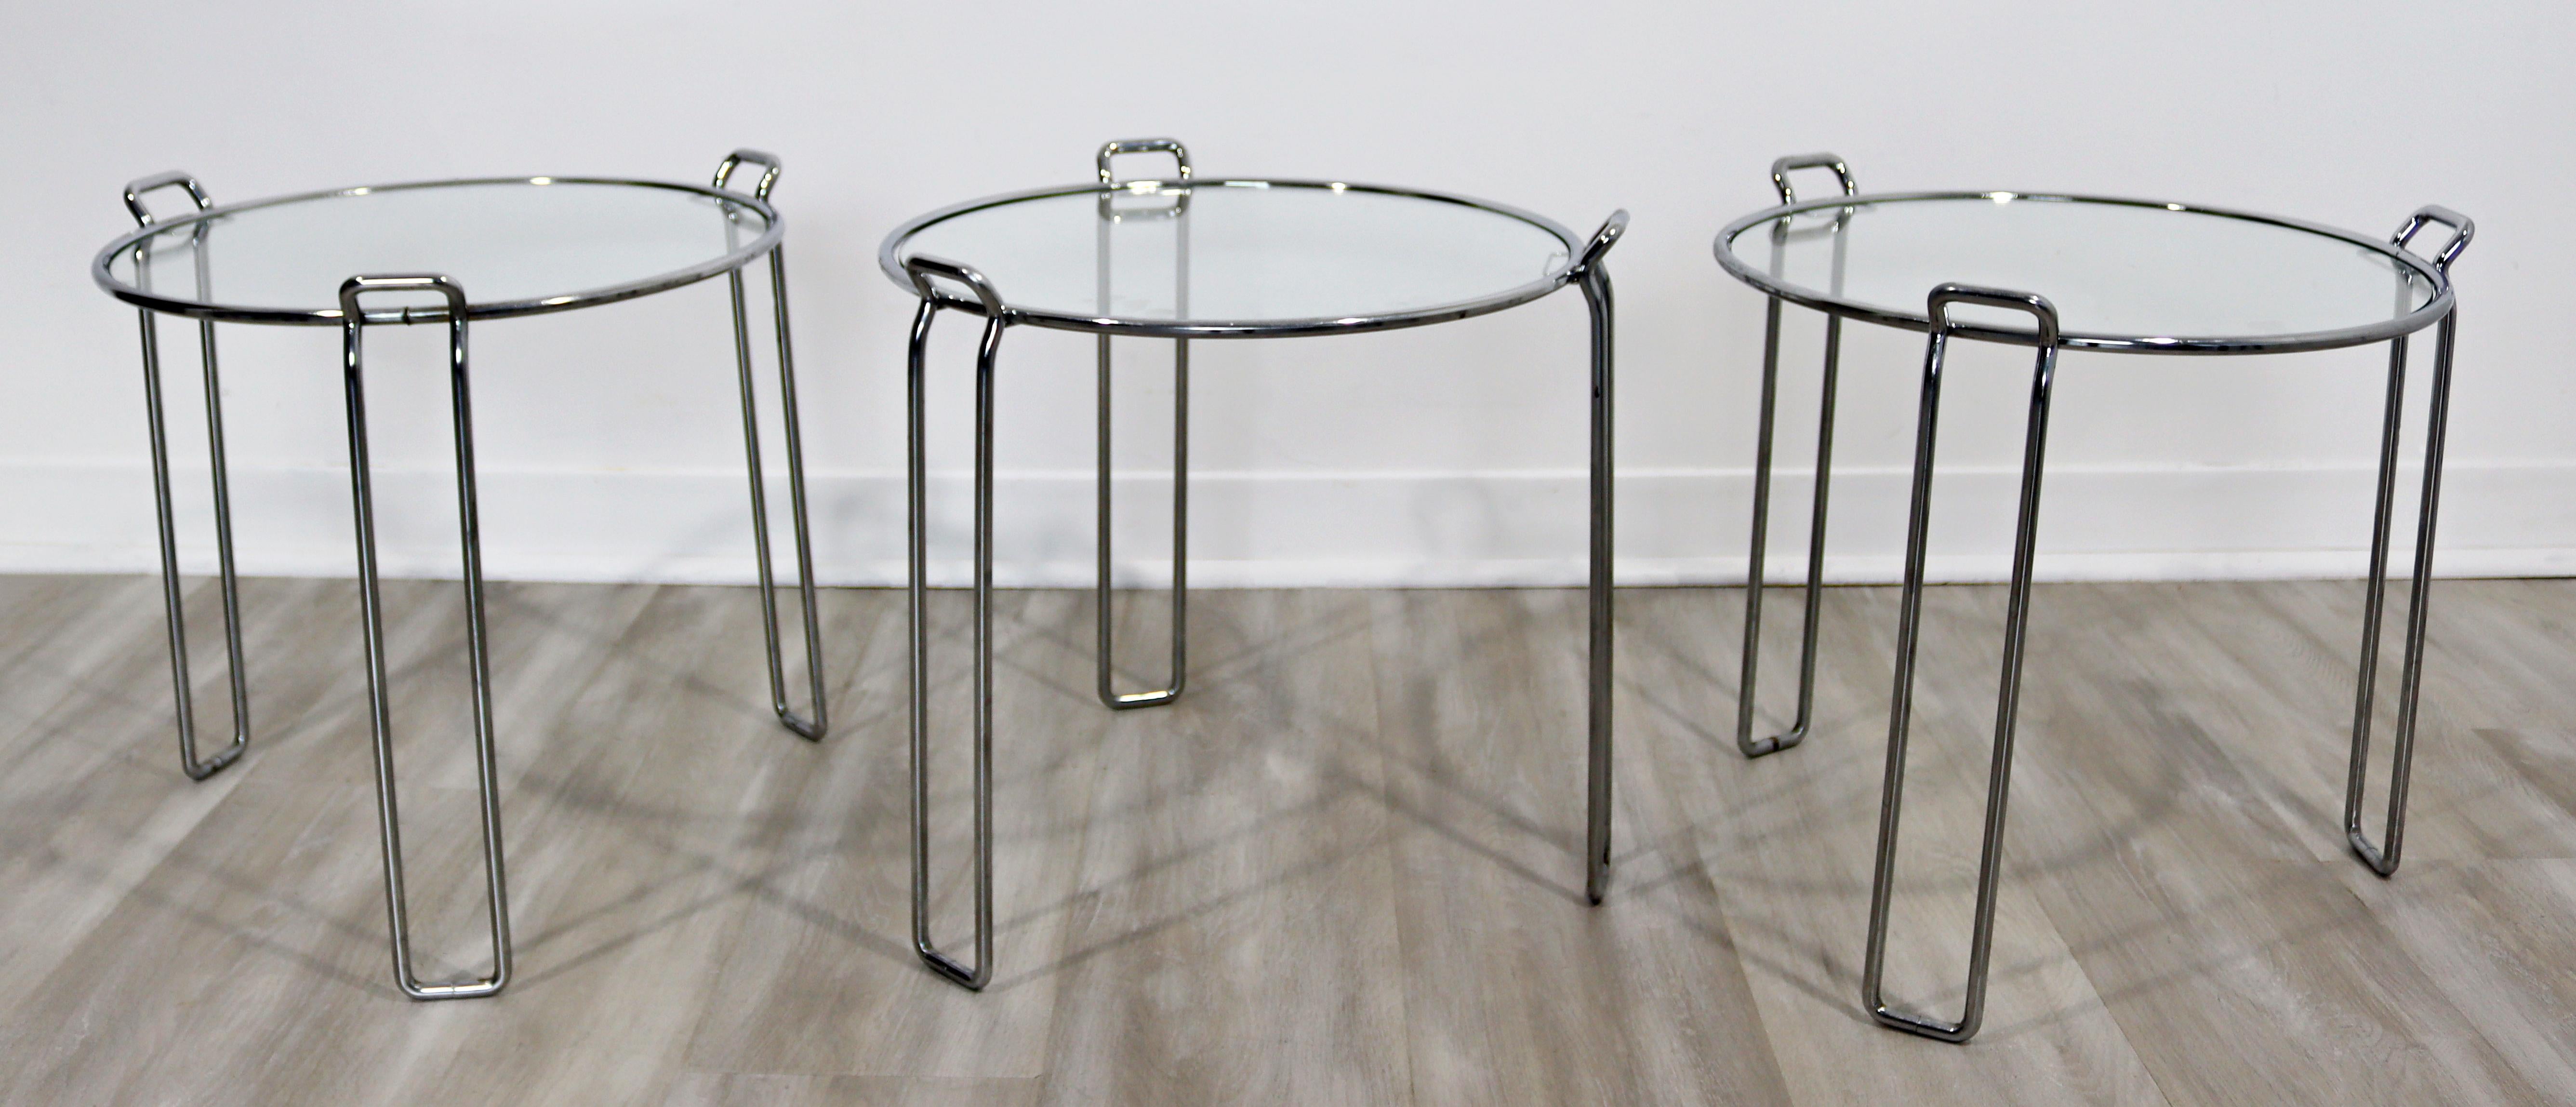 For your consideration is a fabulous set of three stacked nesting tables, made of chrome and with glass tops, by Saporiti, made in Italy, circa the 1960s. In excellent vintage condition, with one tiny nick in a glass top. The dimensions of each are